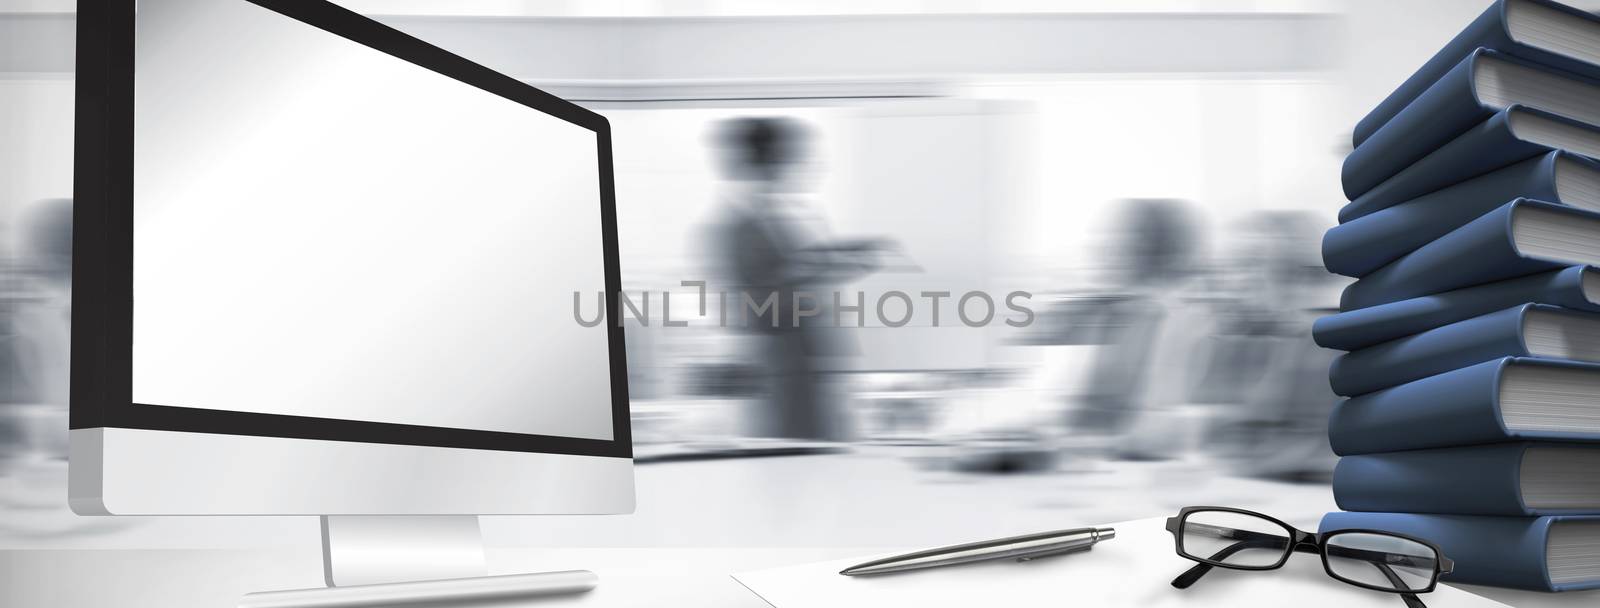 Composite image of computer screen by Wavebreakmedia